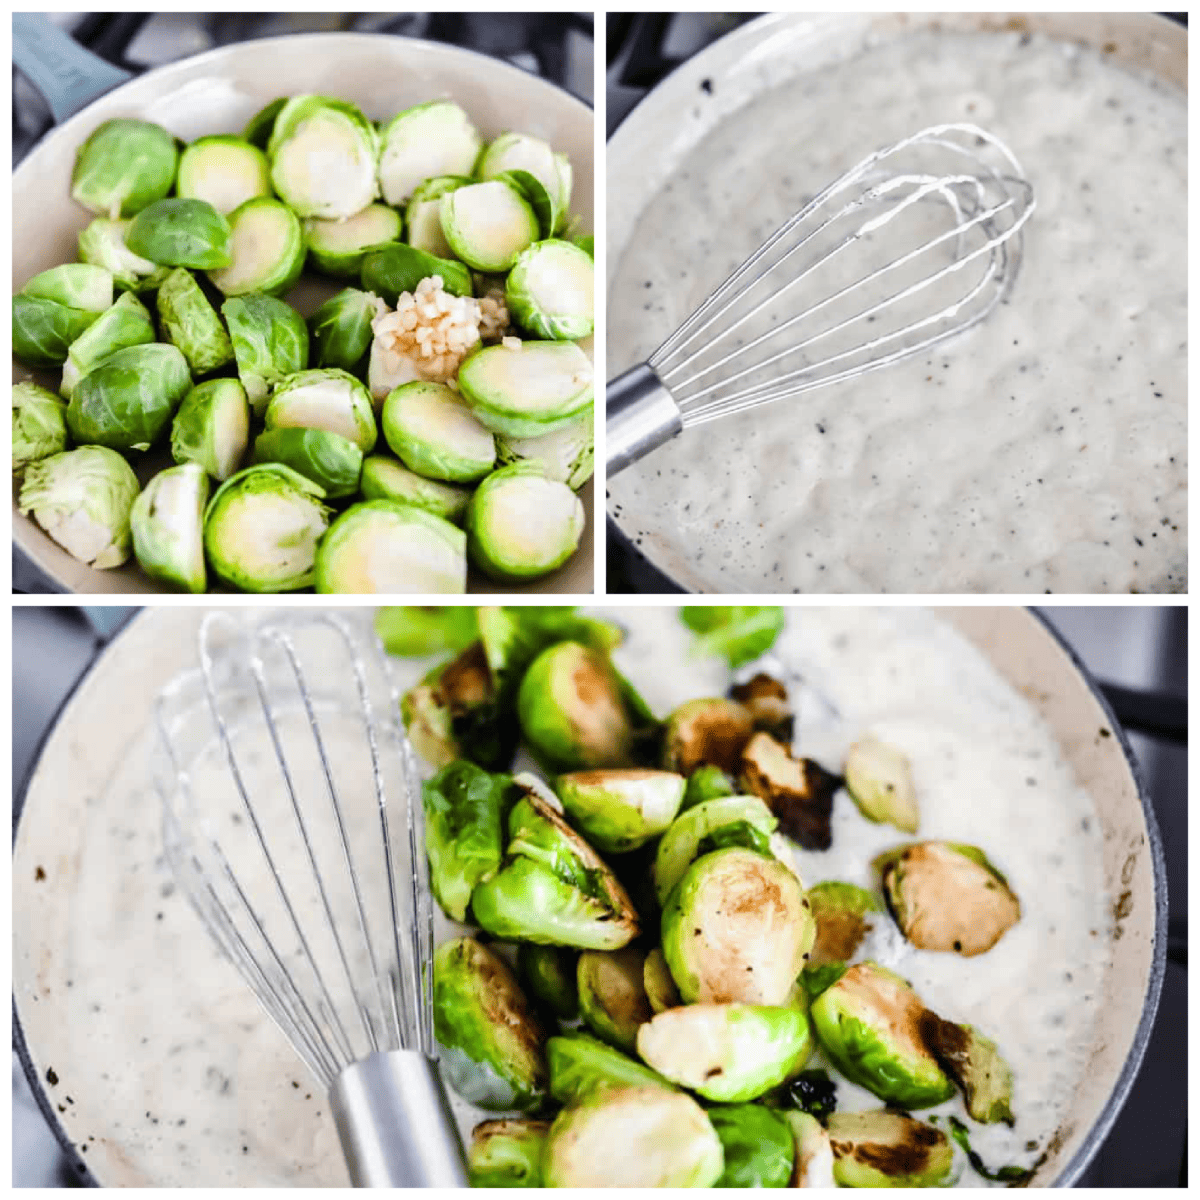 First photo of brussels sprouts and garlic added to the skillet. Second photo of the creamy sauce in a pan. Third photo of the cooked brussels sprouts add to the pan of sauce.